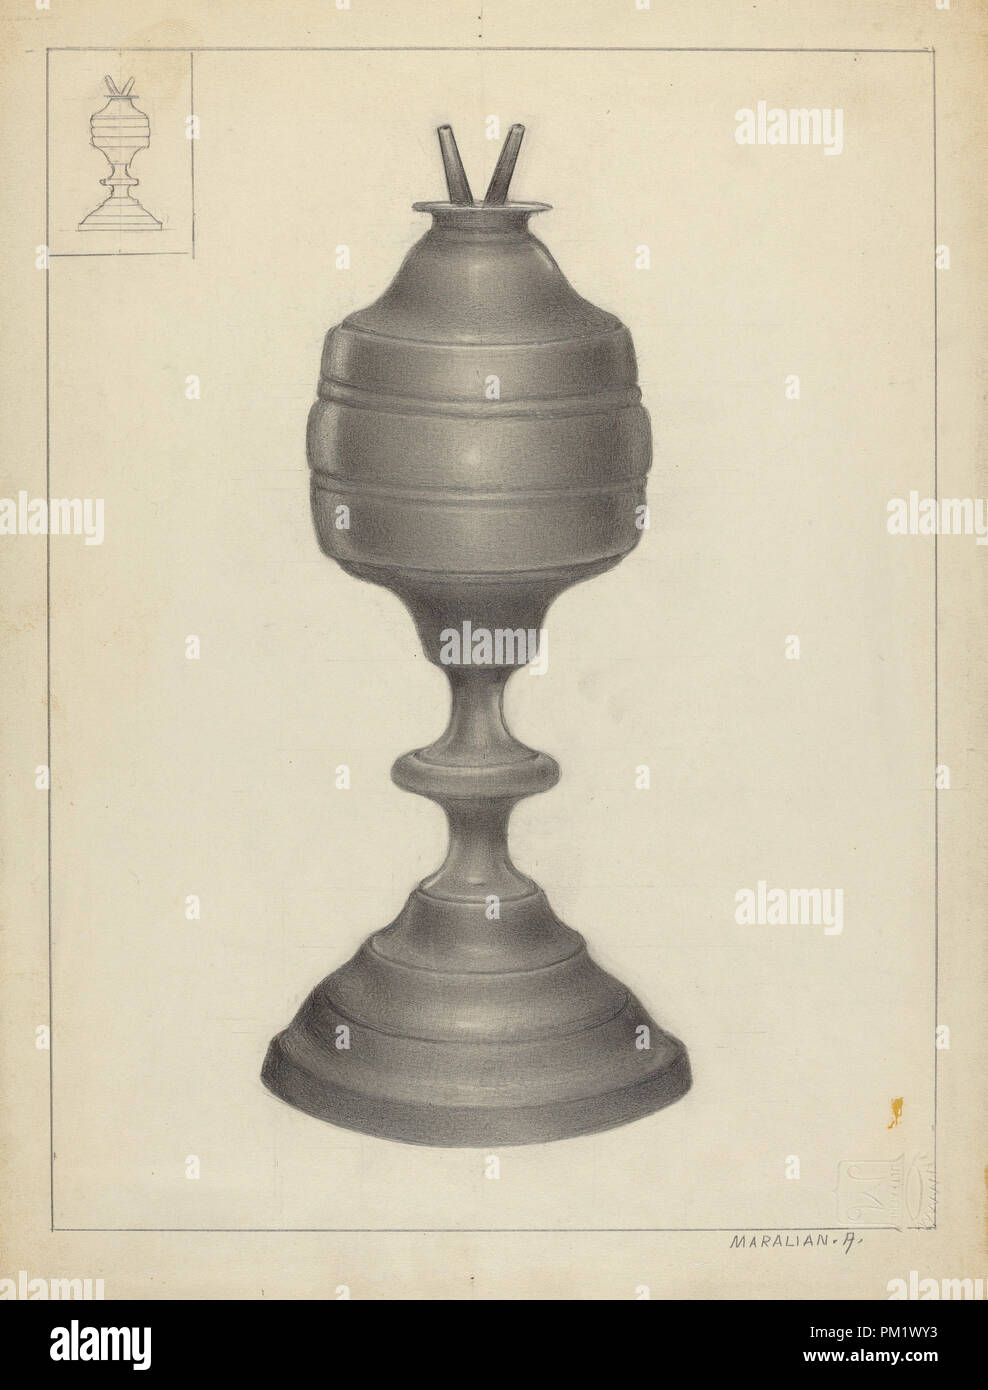 Camphene Lamp. Dated: 1935/1942. Dimensions: overall: 29.3 x 22.2 cm (11 9/16 x 8 3/4 in.). Medium: graphite on paper. Museum: National Gallery of Art, Washington DC. Author: Arsen Maralian. Stock Photo